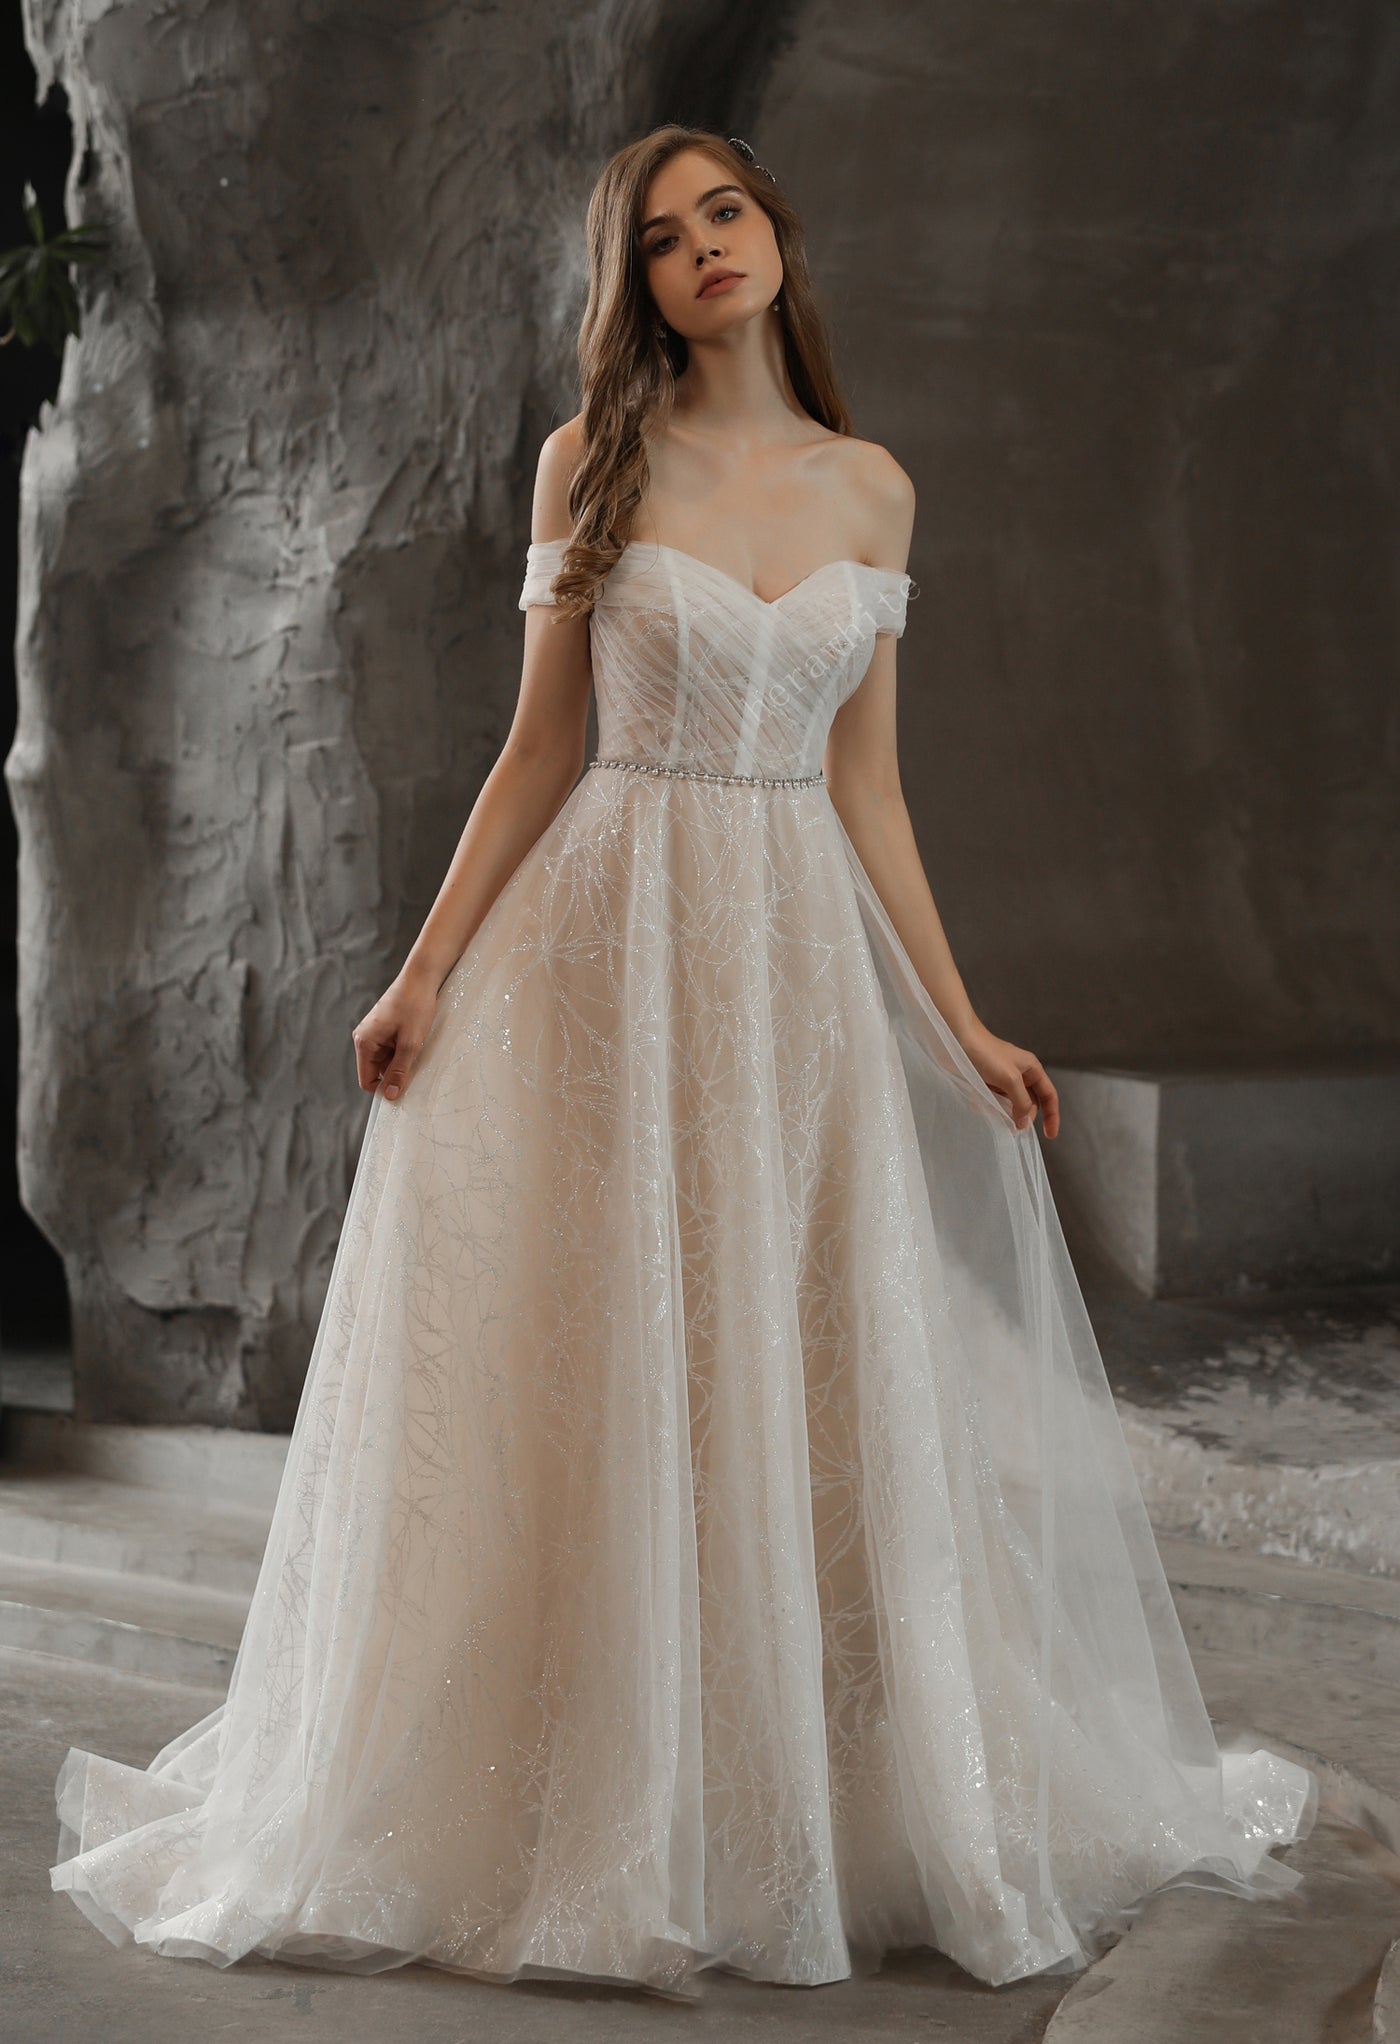 Shimmer Off-the-shoulder Neckline A-line Tulle Wedding Dress with lace and beading available at Bergamot Bridal bridal shops in London.